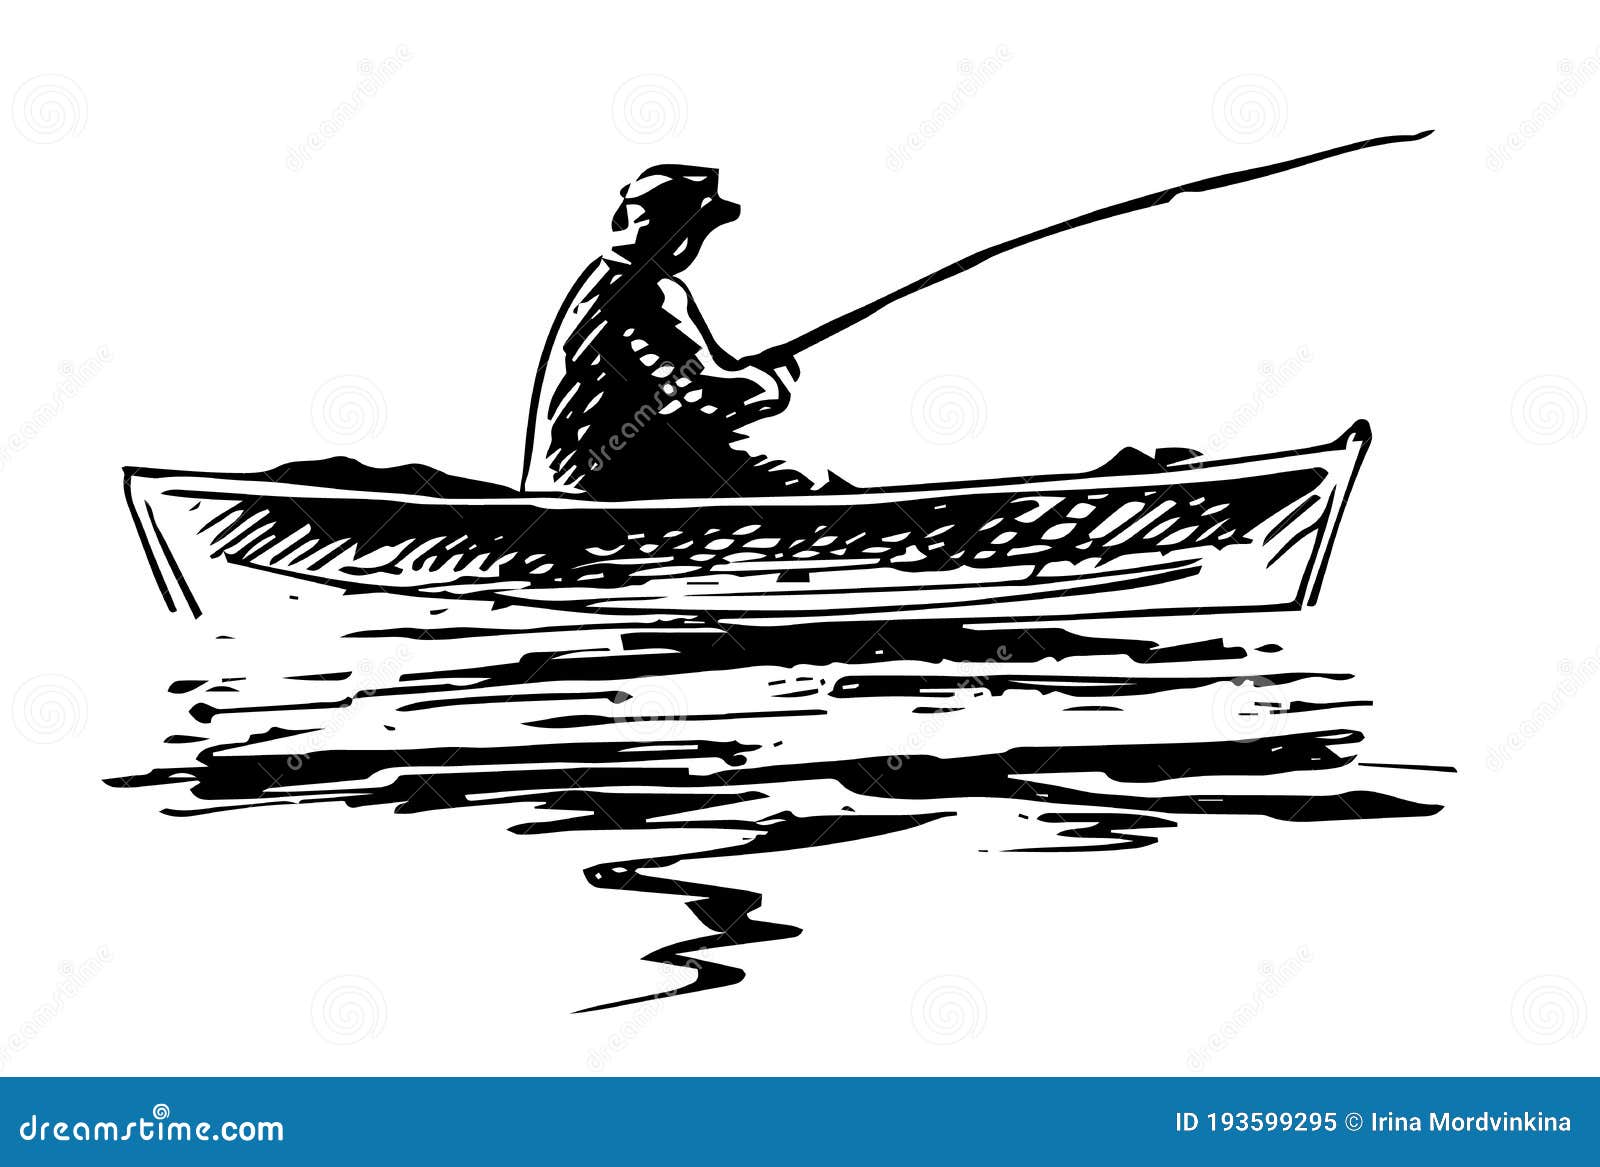 https://thumbs.dreamstime.com/z/fisherman-fishing-rod-boat-waves-reflection-sketch-outline-hand-drawing-isolated-vector-object-white-193599295.jpg